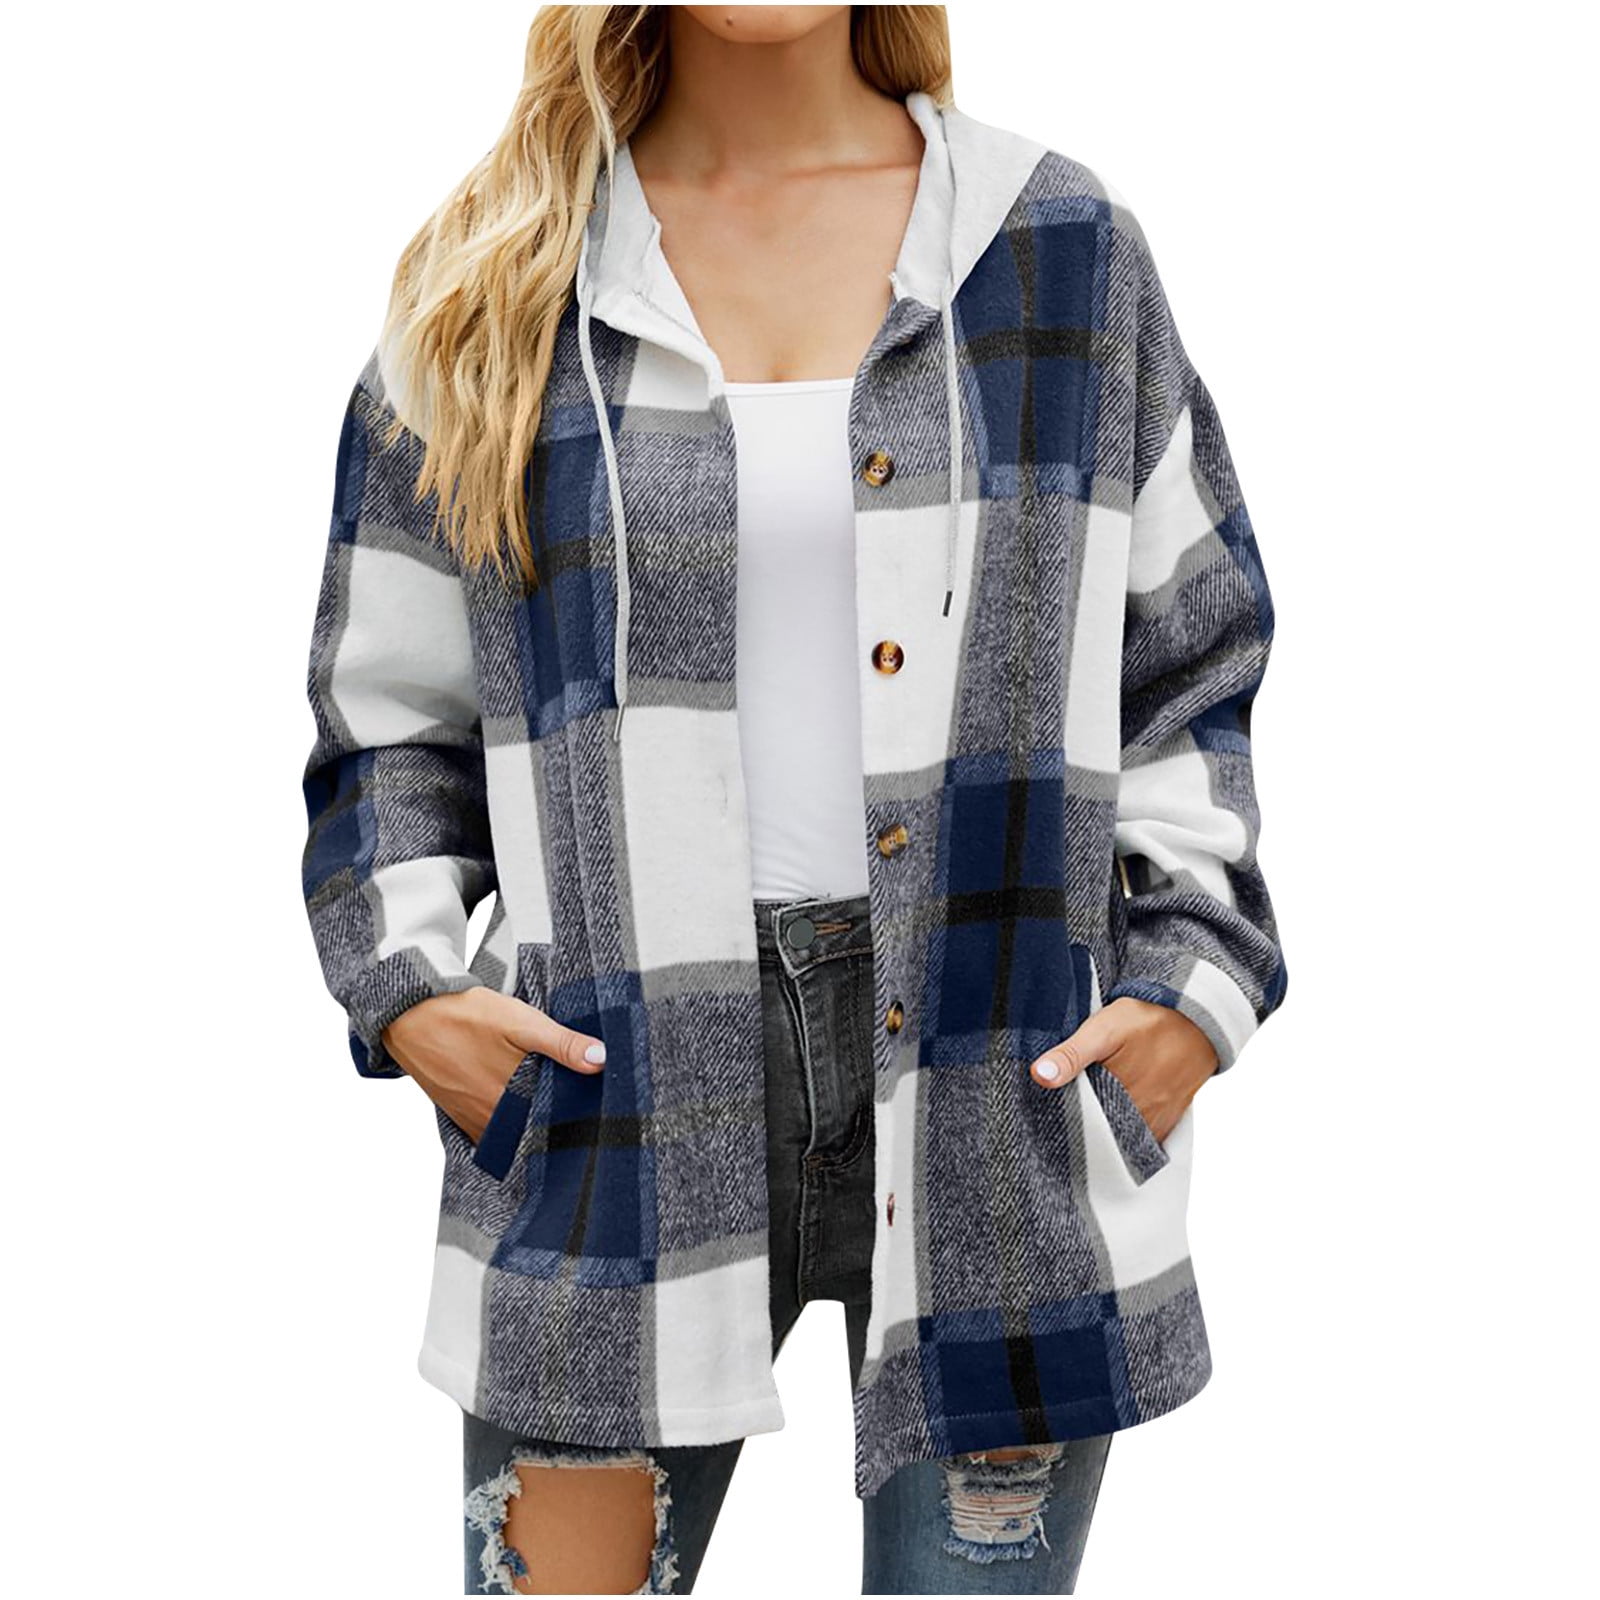 Women's Casual Hooded Shacket Jacket Casual Oversized Flannel Plaid ...